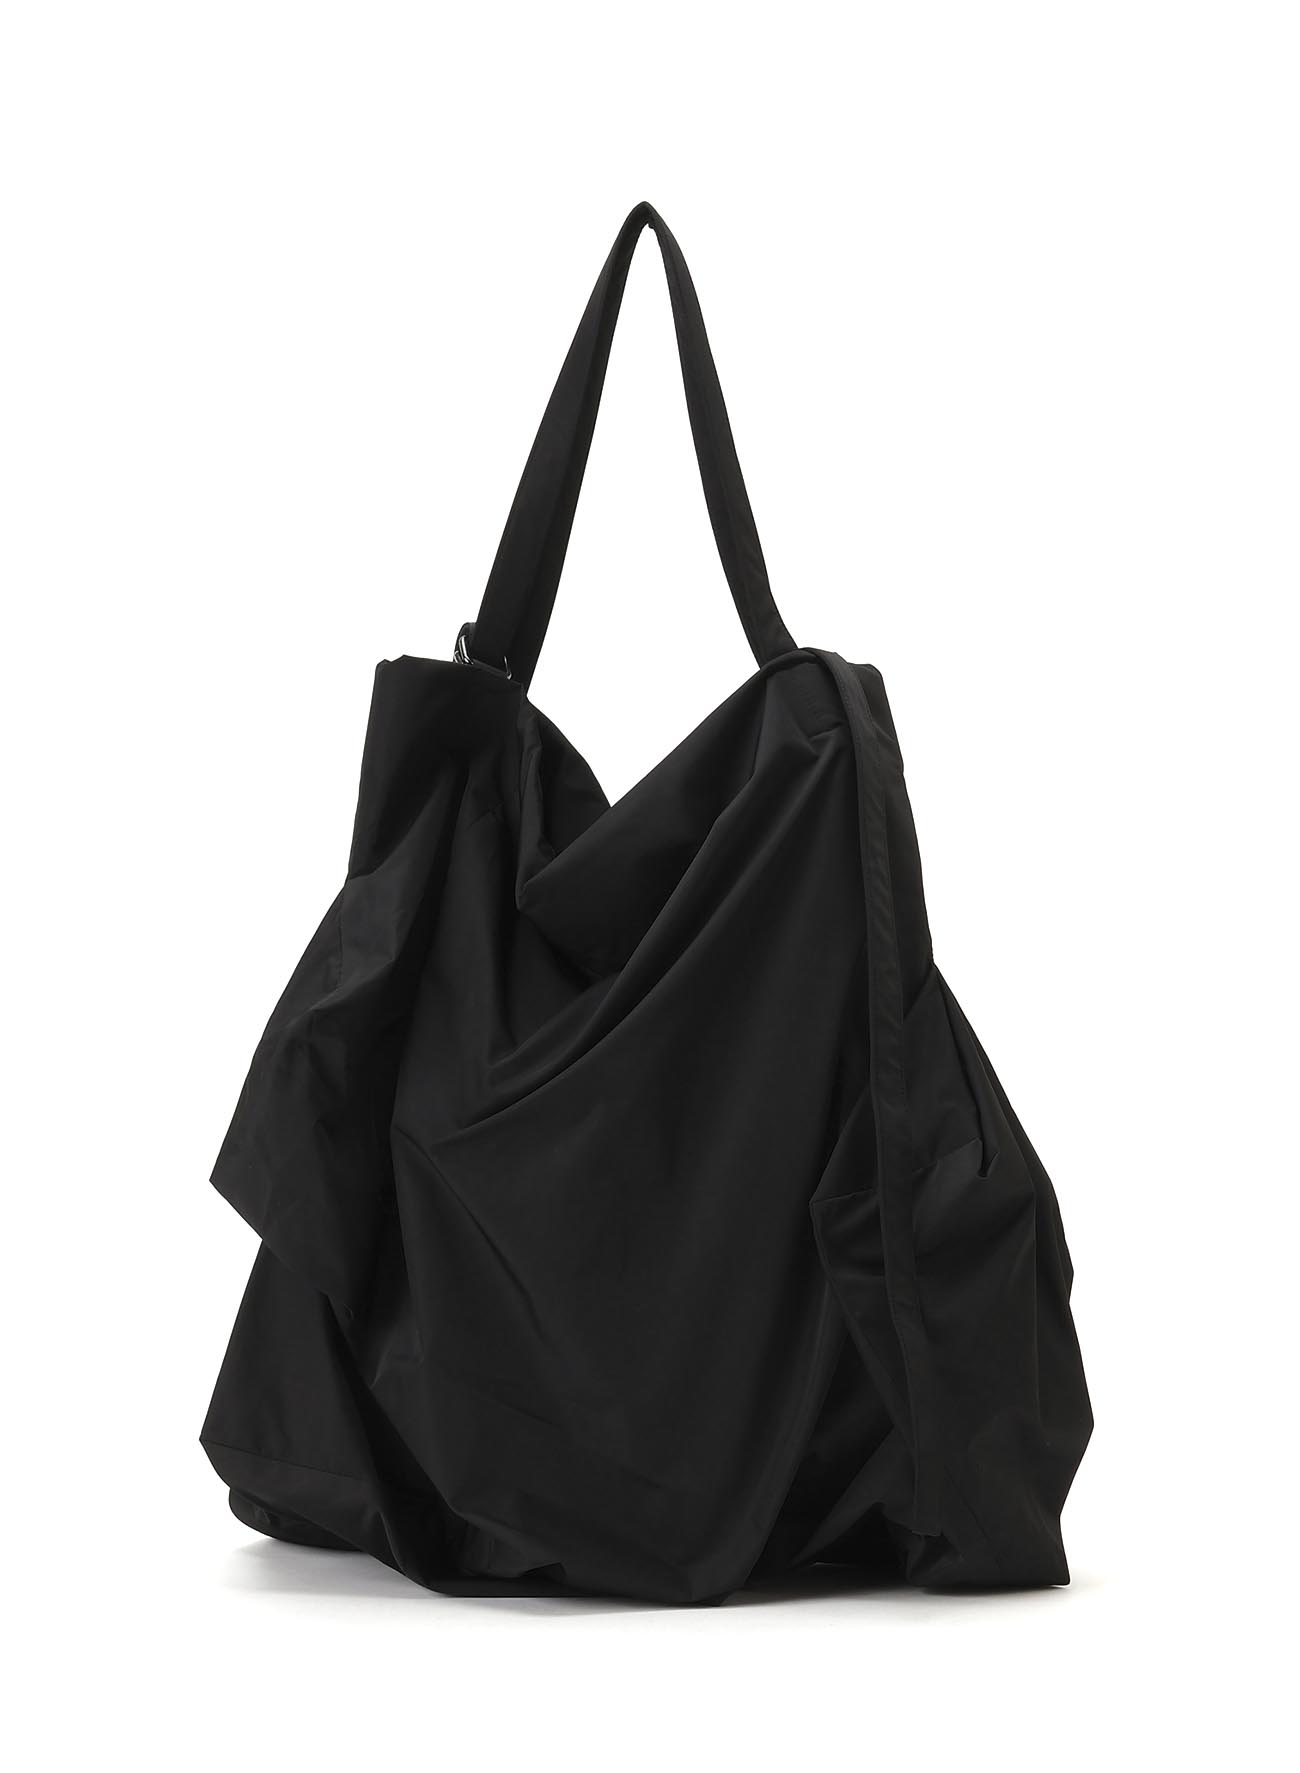 Unevenness tote